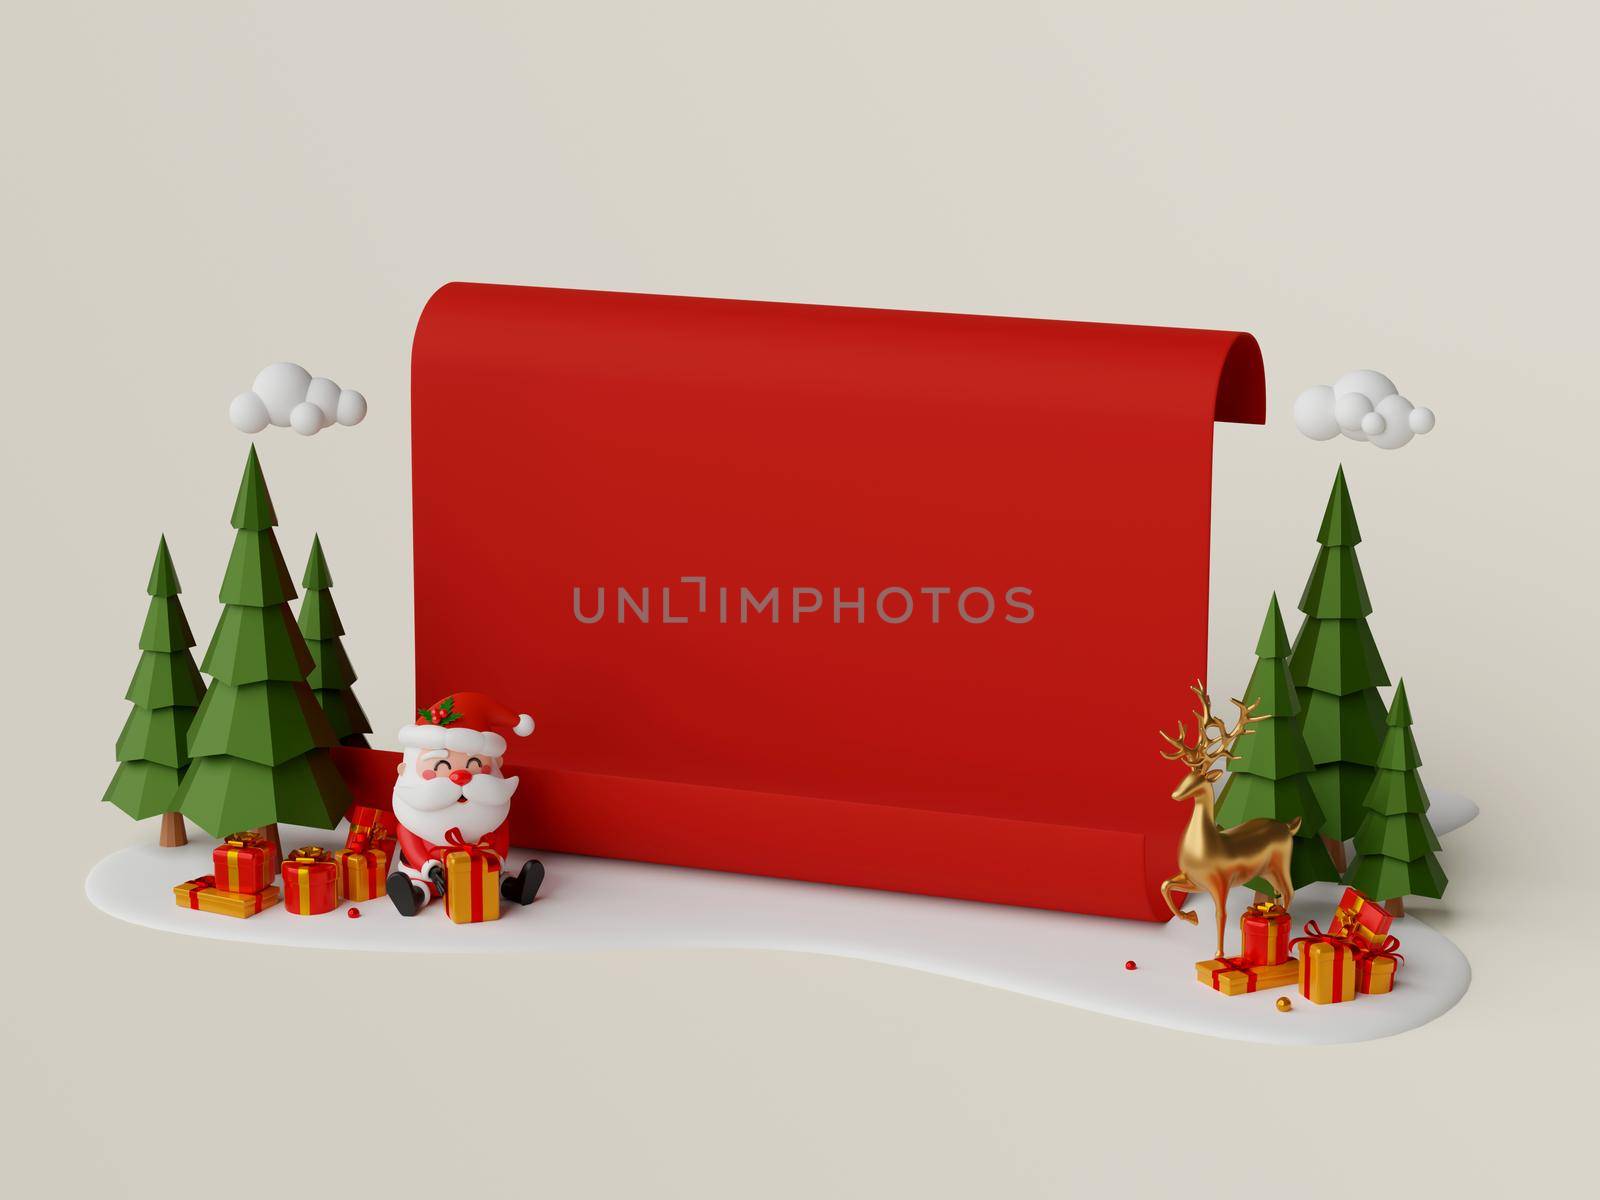 3d illustration of Christmas red paper on snow ground with Santa Claus and giftbox